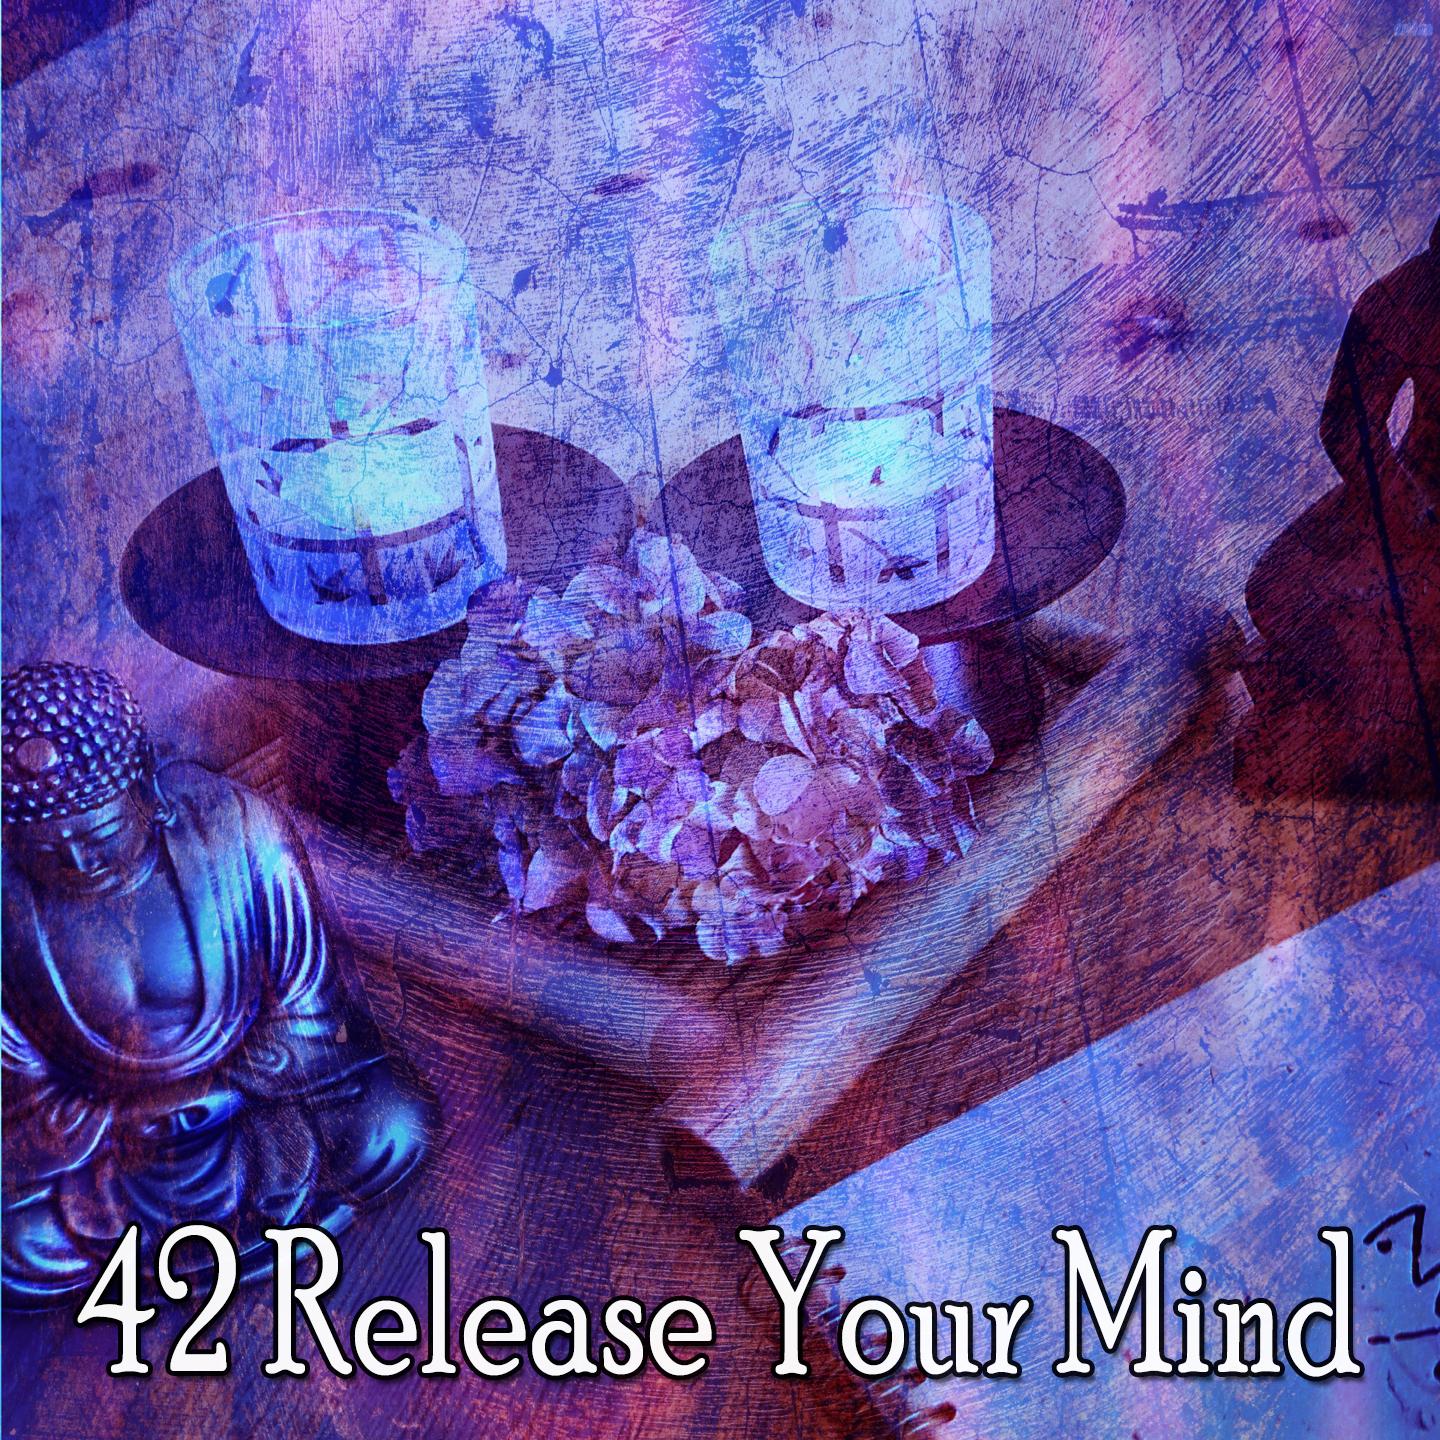 42 Release Your Mind